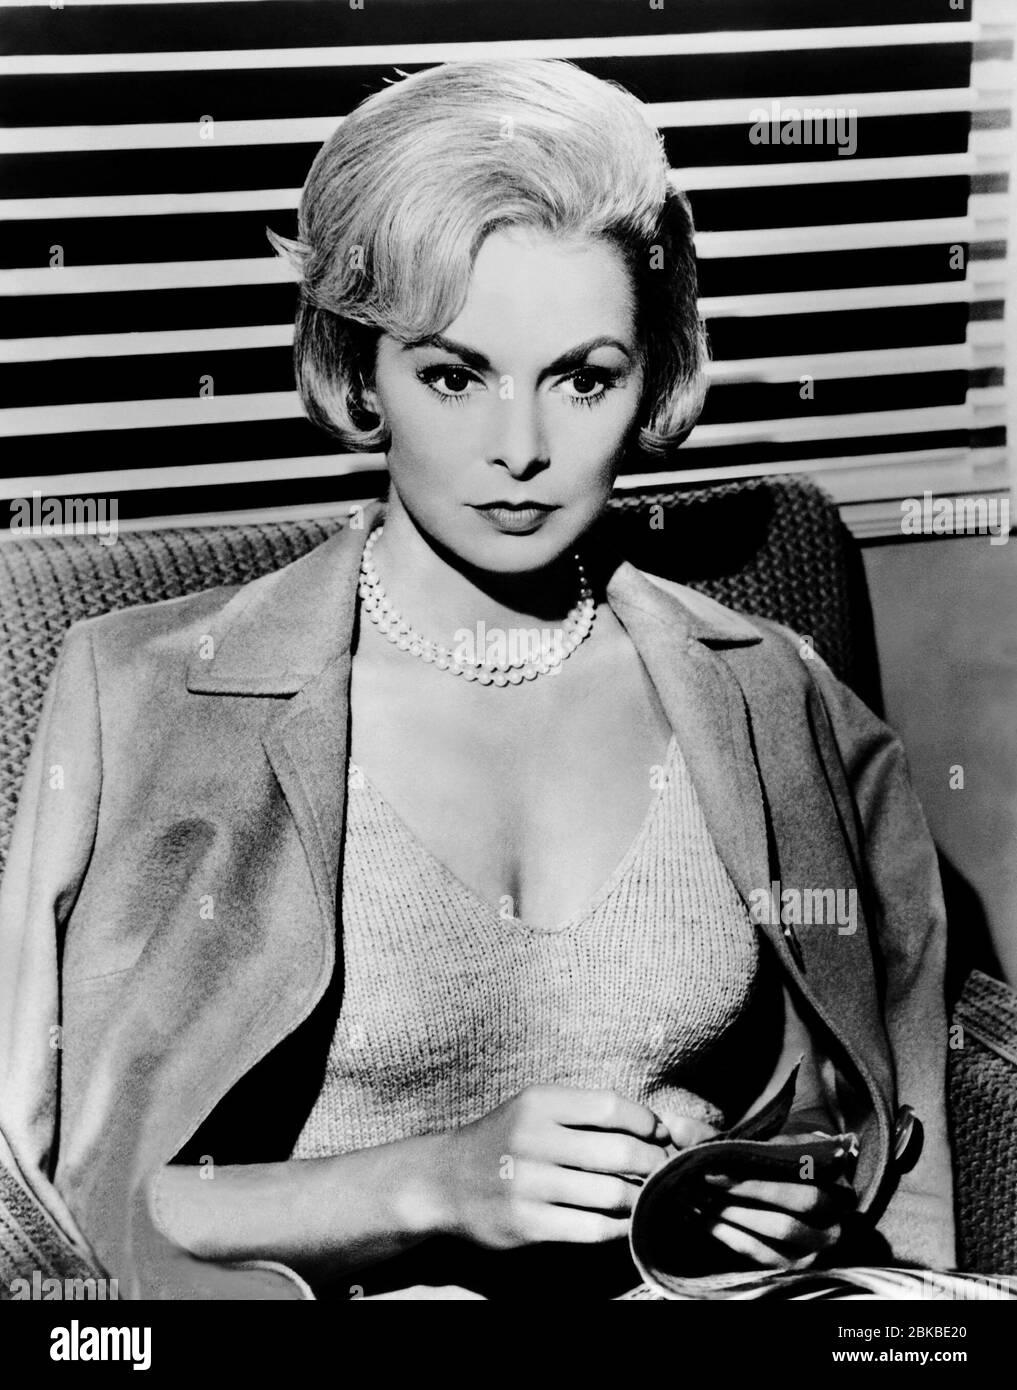 JANET LEIGH, THE MANCHURIAN CANDIDATE, 1962 Stock Photo - Alamy